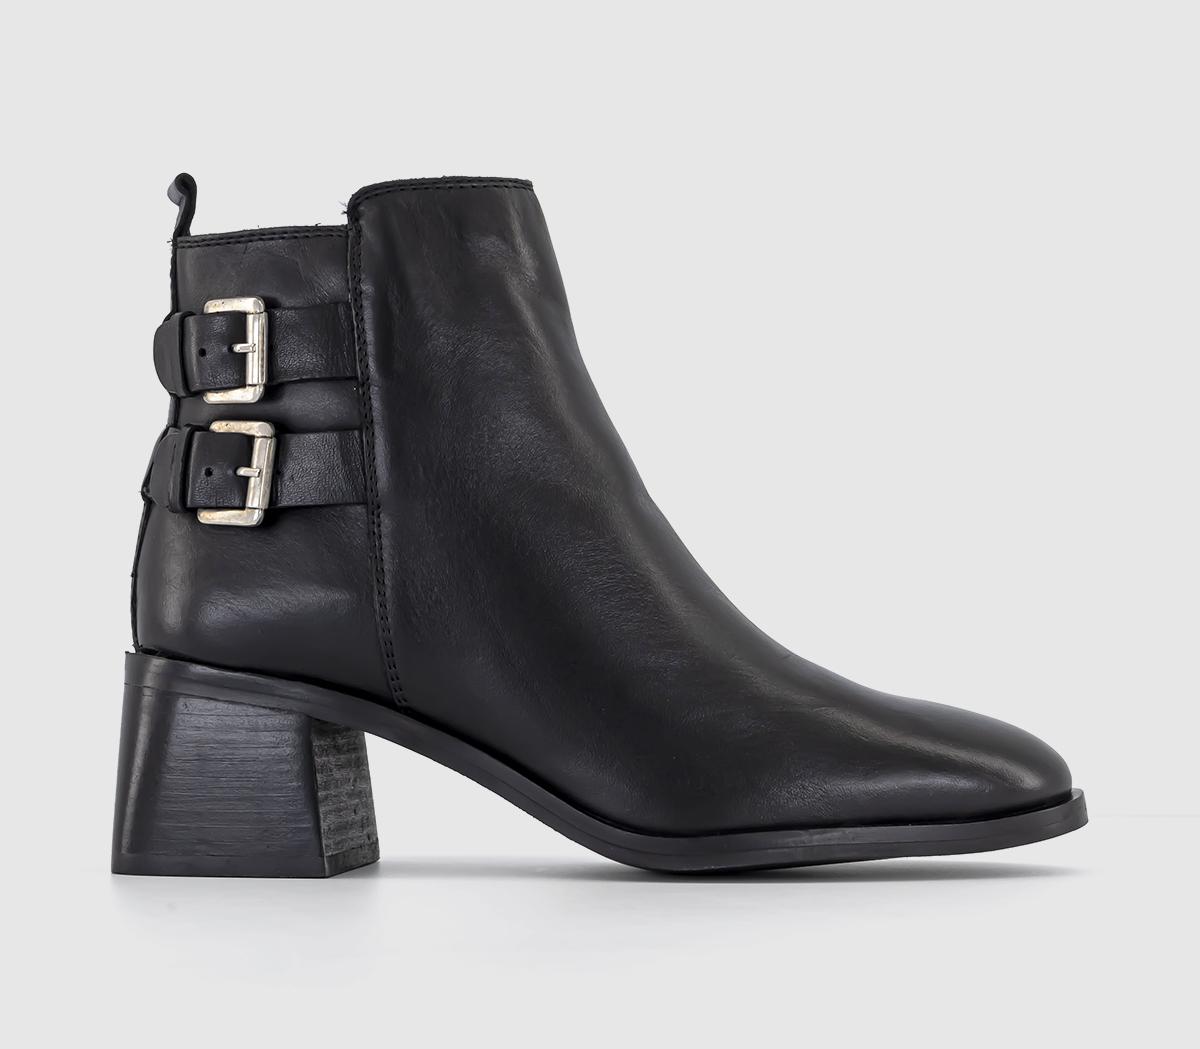 OFFICEAugust Buckle Detail Block Heeled BootsBlack Leather